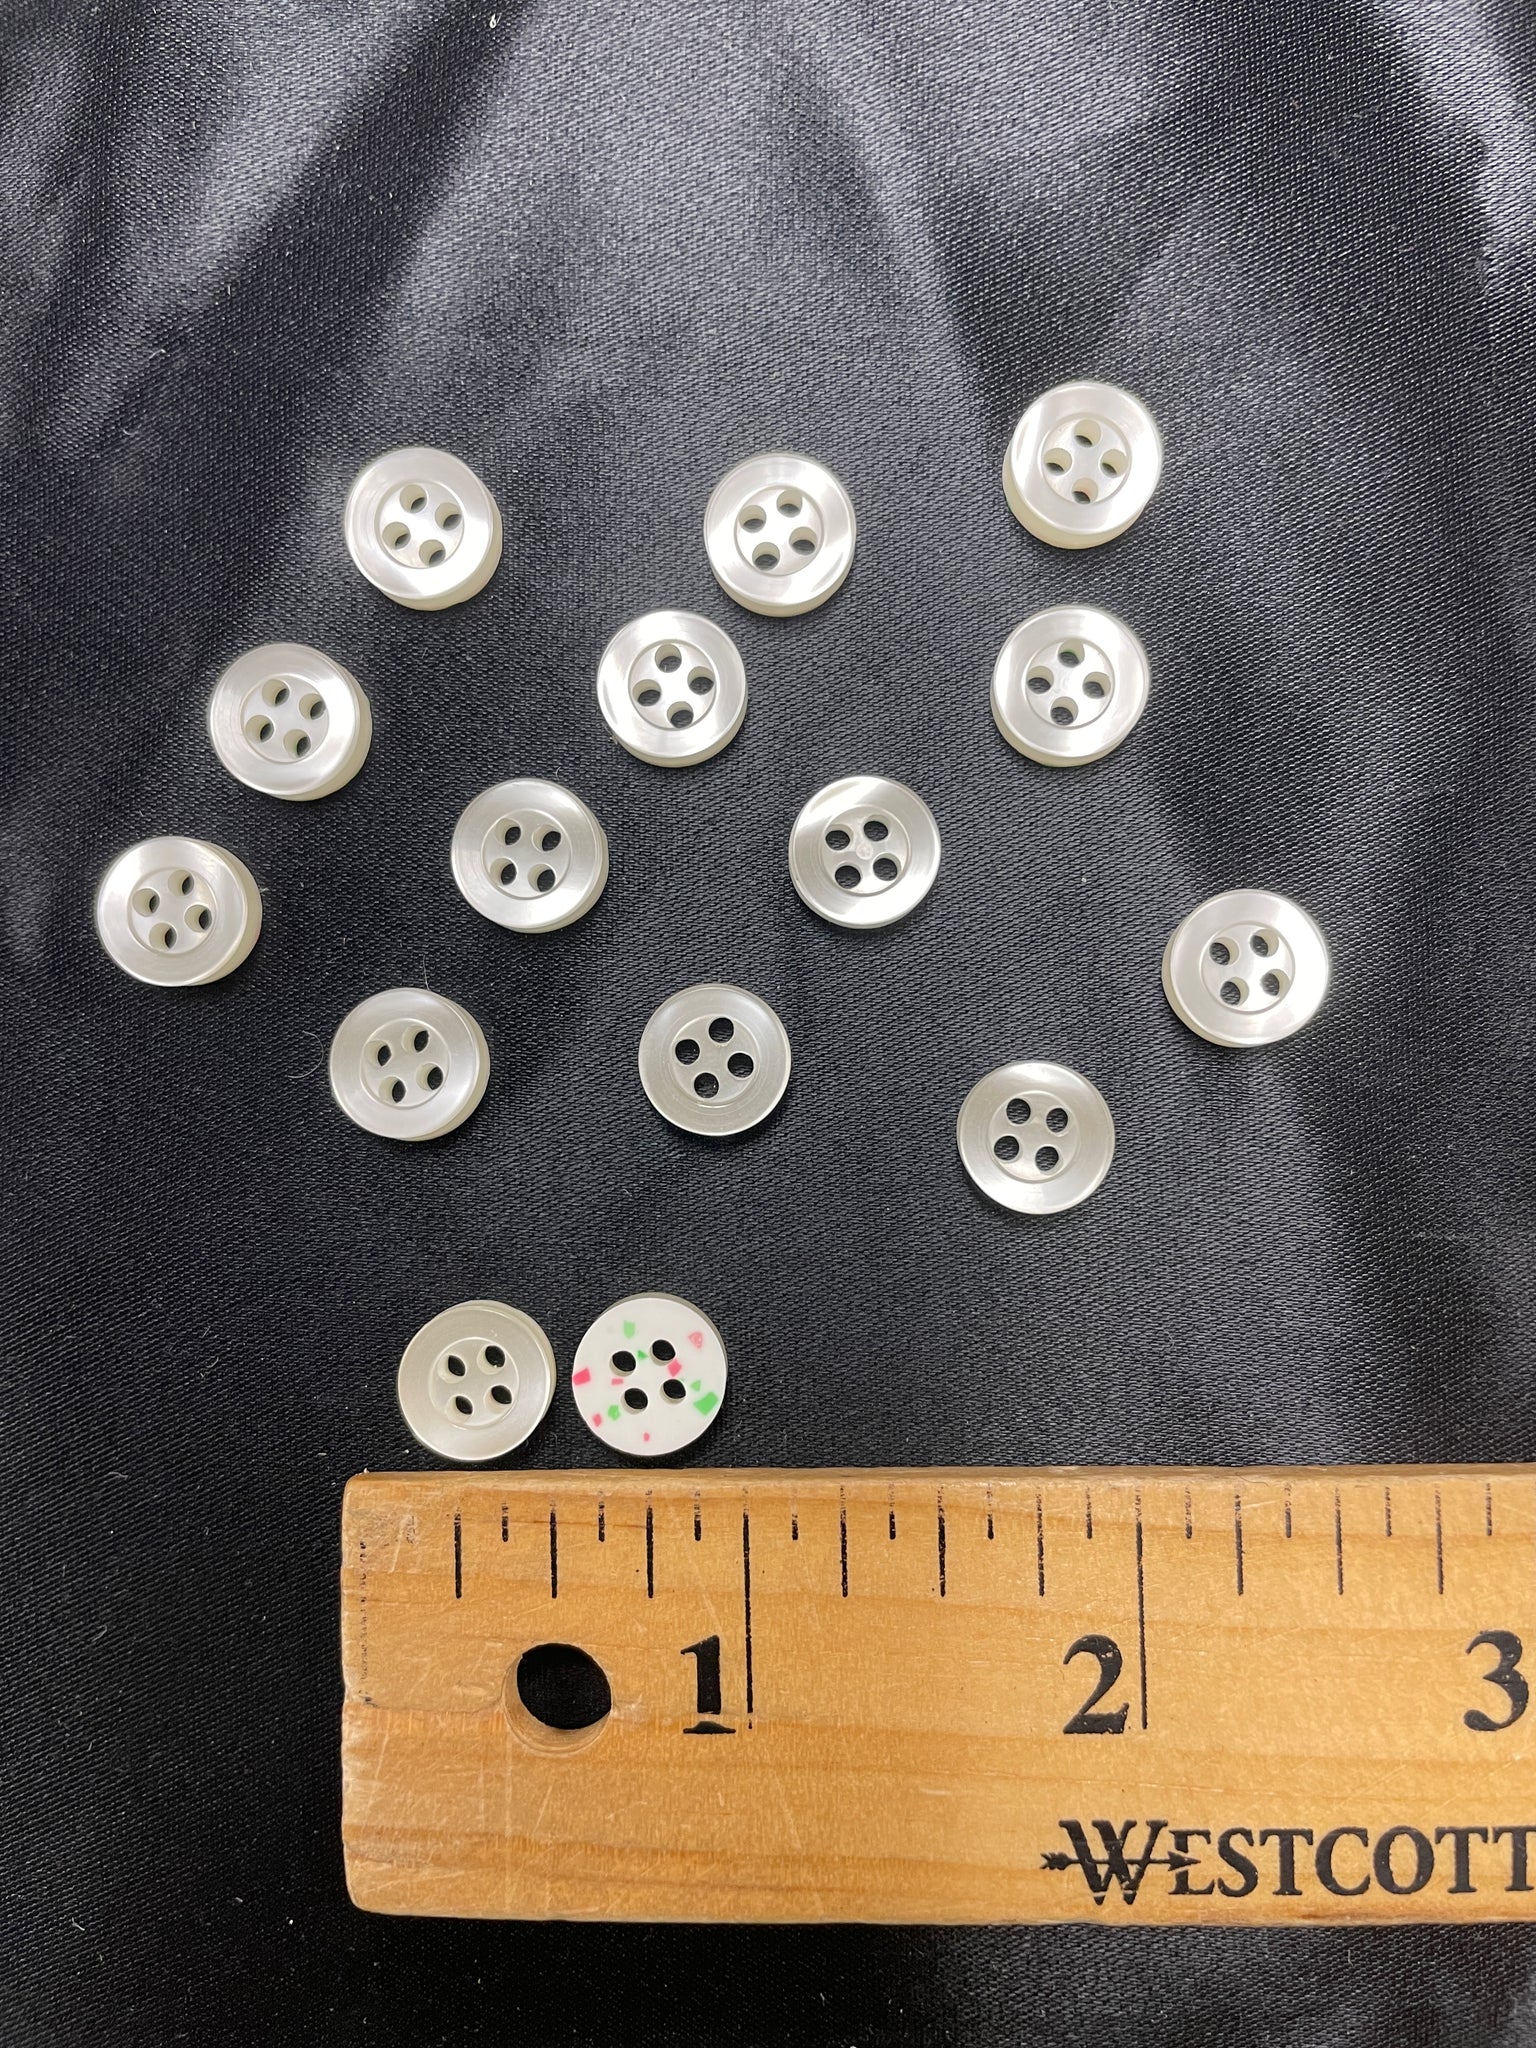 Buttons Plastic Set of 15 - Pearlized White with Confetti Backs